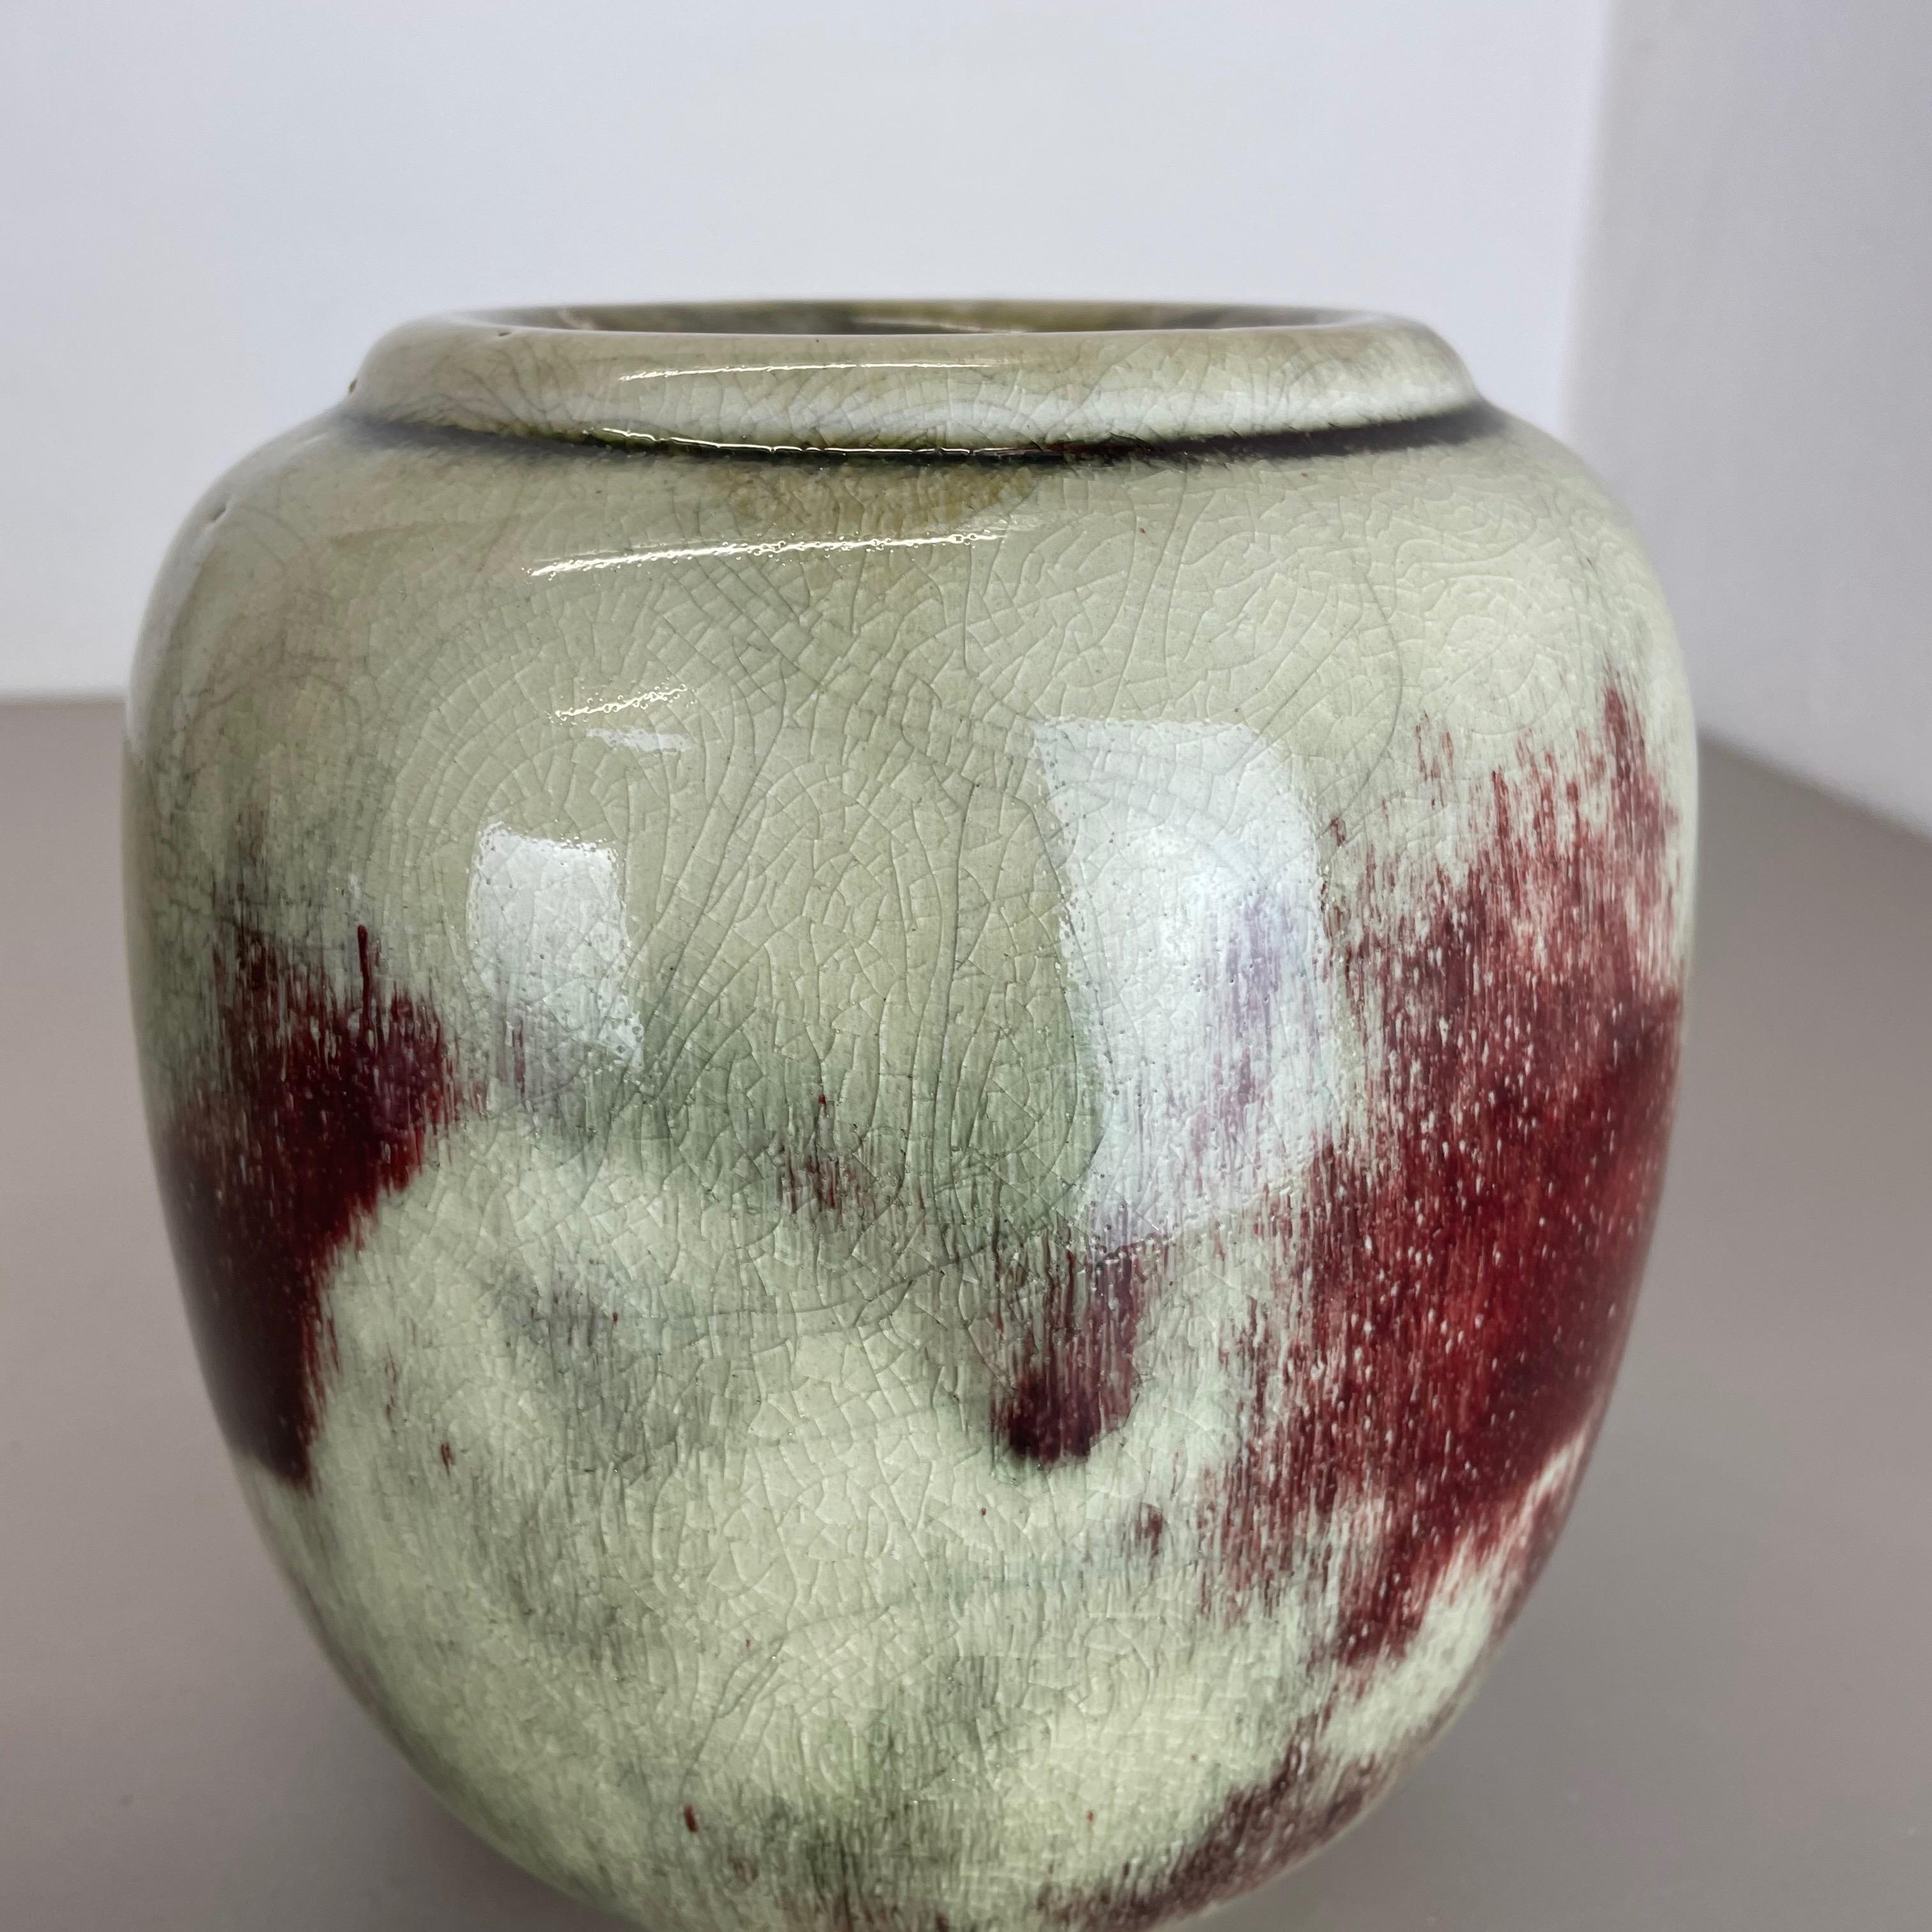 Unique Abstract Bauhaus Vase Pottery by WMF Ikora, Germany 1930s Art Deco For Sale 4